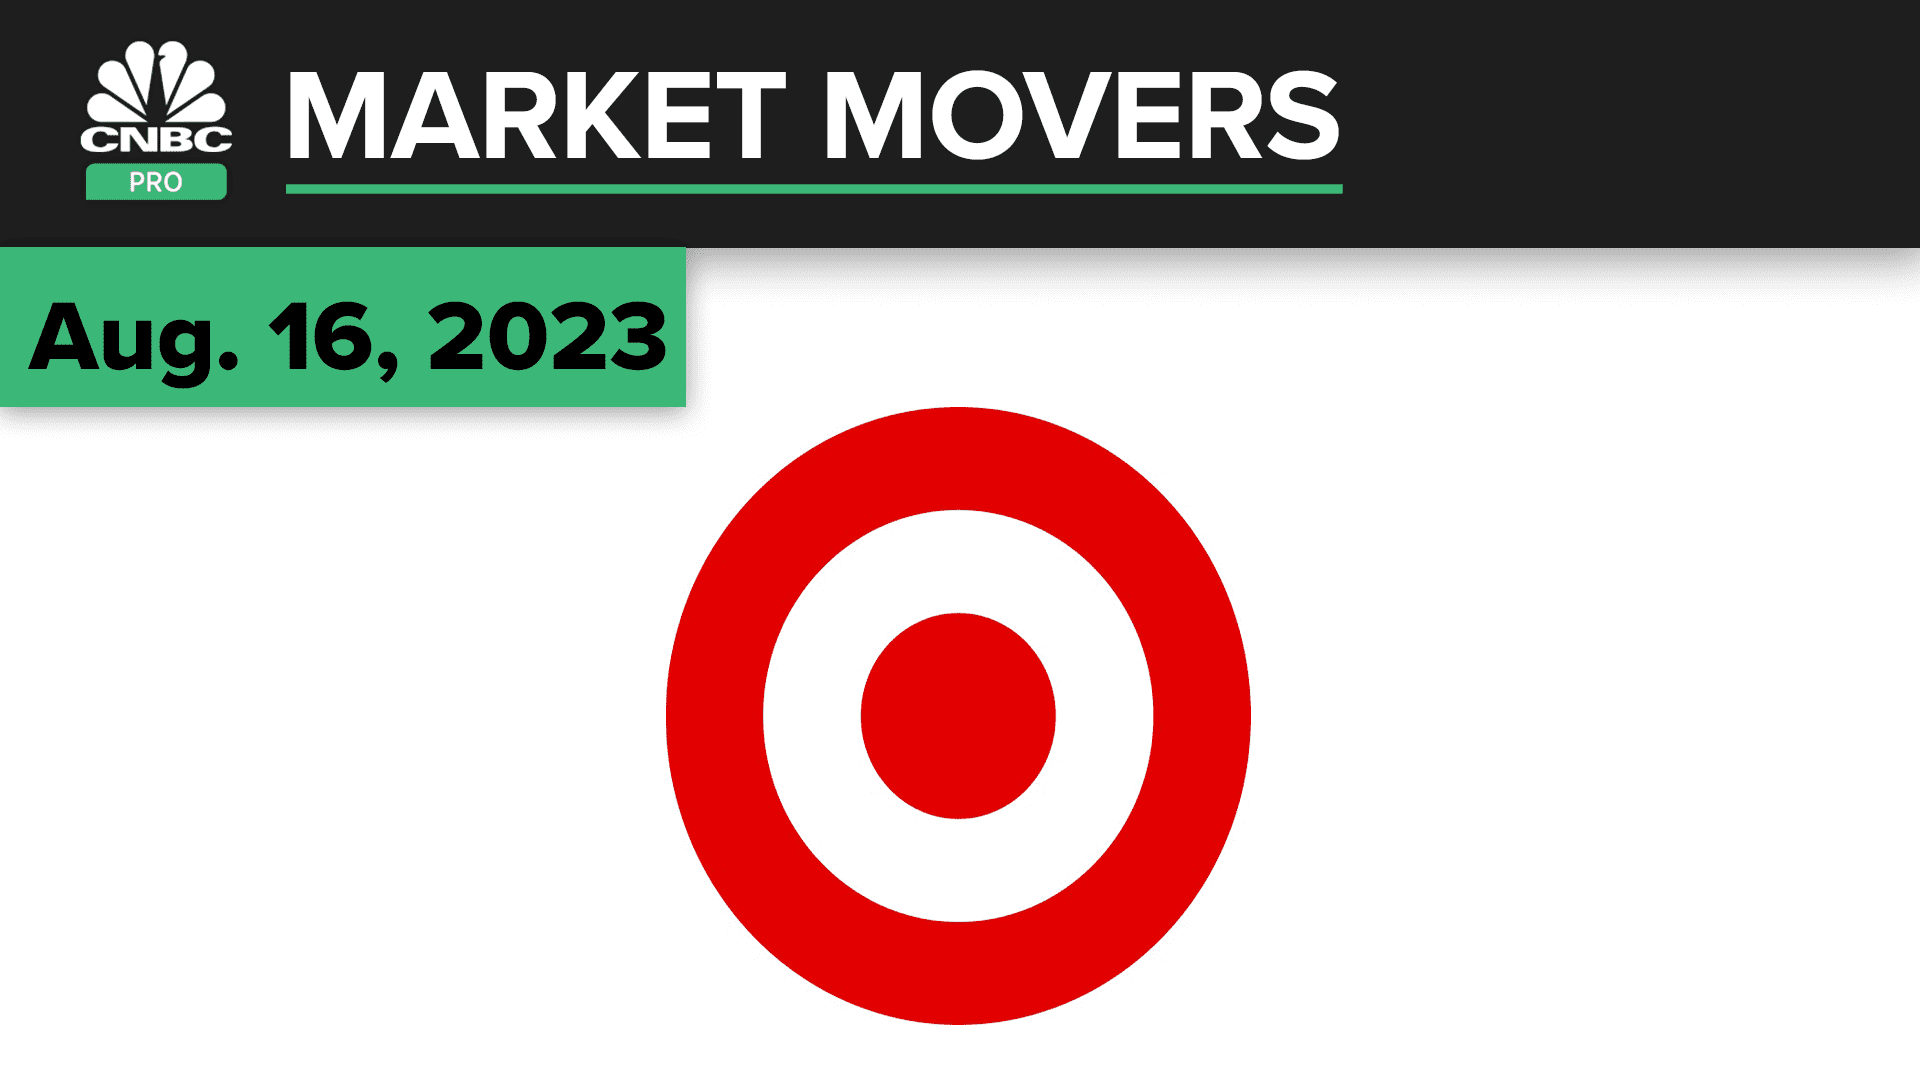 Target shares pop nearly 3% after earnings. Here’s what the pros say to do next